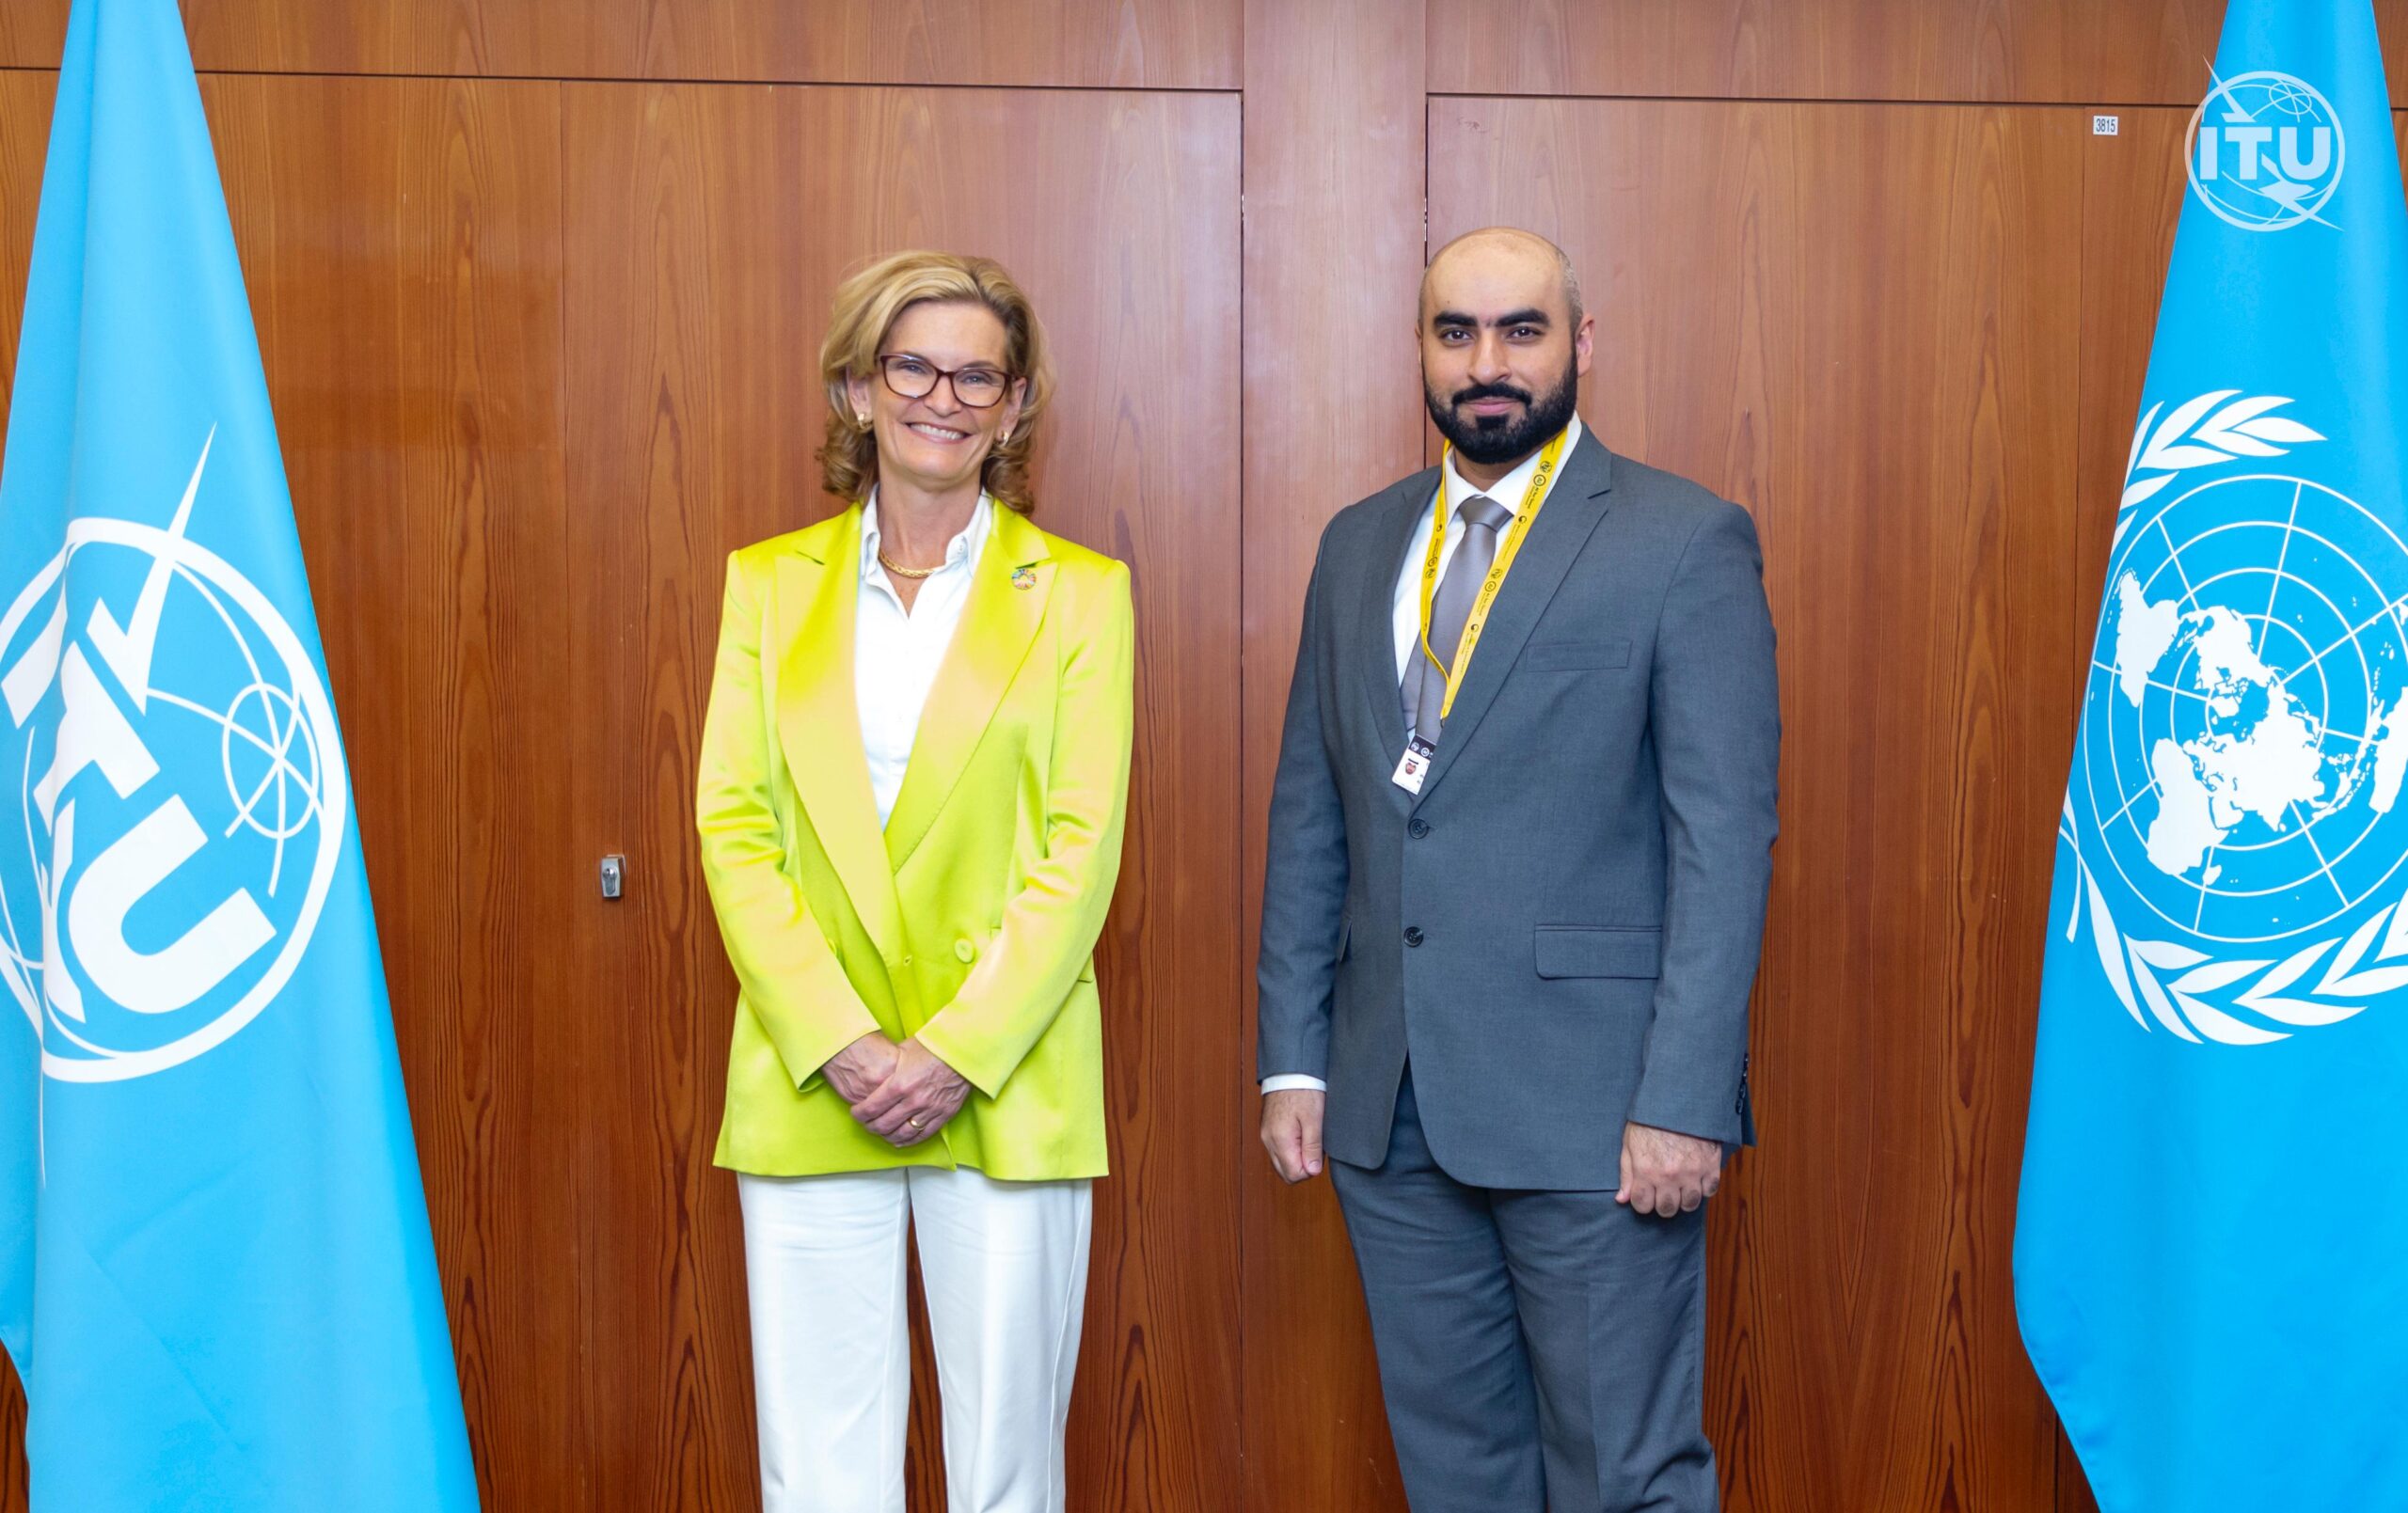 Meeting between the Secretary-General of the ITU and the Secretary-General of TDS discusses the most prominent developments in digital education and areas of cooperation.